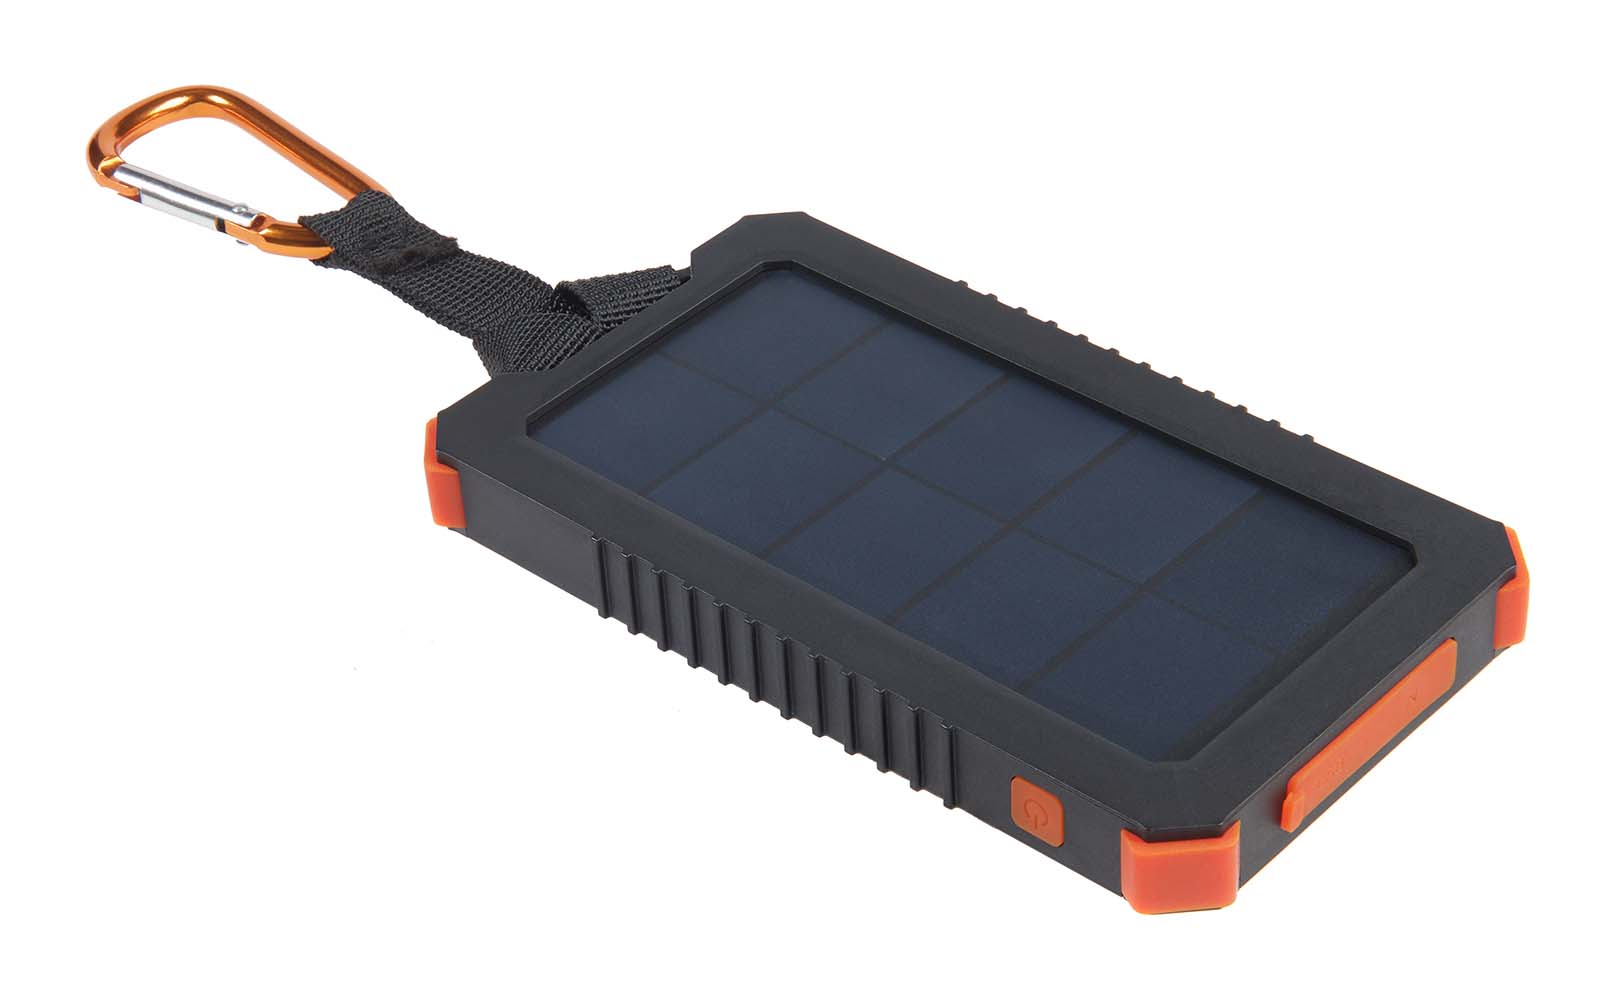 5921079 The Impulse Solar charger ideal for on the go. The charger is drop-resistant (1M) and splash-proof. The solar charger has an internal battery of 5,000mAh that can store enough energy to charge your smartphone up to 2 times! The solar charger is equipped with a handy torch. The internal battery can easily be recharged via USB, mains power or by using the solar panel.